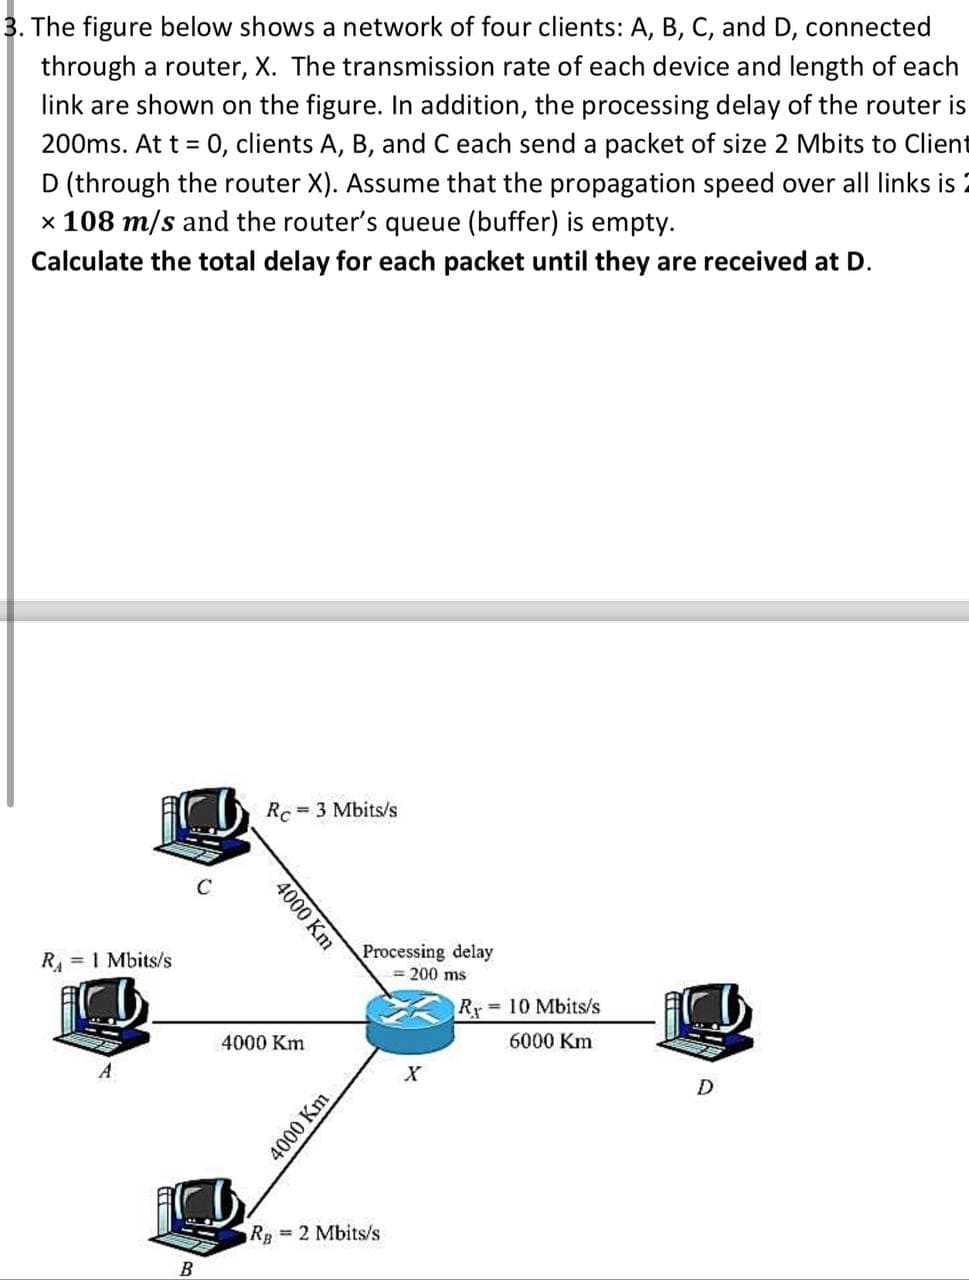 3. The figure below shows a network of four clients: A, B, C, and D, connected
through a router, X. The transmission rate of each device and length of each
link are shown on the figure. In addition, the processing delay of the router is
200ms. At t = 0, clients A, B, and C each send a packet of size 2 Mbits to Client
D (through the router X). Assume that the propagation speed over all links is 2
x 108 m/s and the router's queue (buffer) is empty.
Calculate the total delay for each packet until they are received at D.
R₁ = 1 Mbits/s
C
B
Rc=3 Mbits/s
4000 Km
4000 Km
4000 Km
Processing delay
= 200 ms
R = 10 Mbits/s
6000 Km
RB
= 2 Mbits/s
X
D